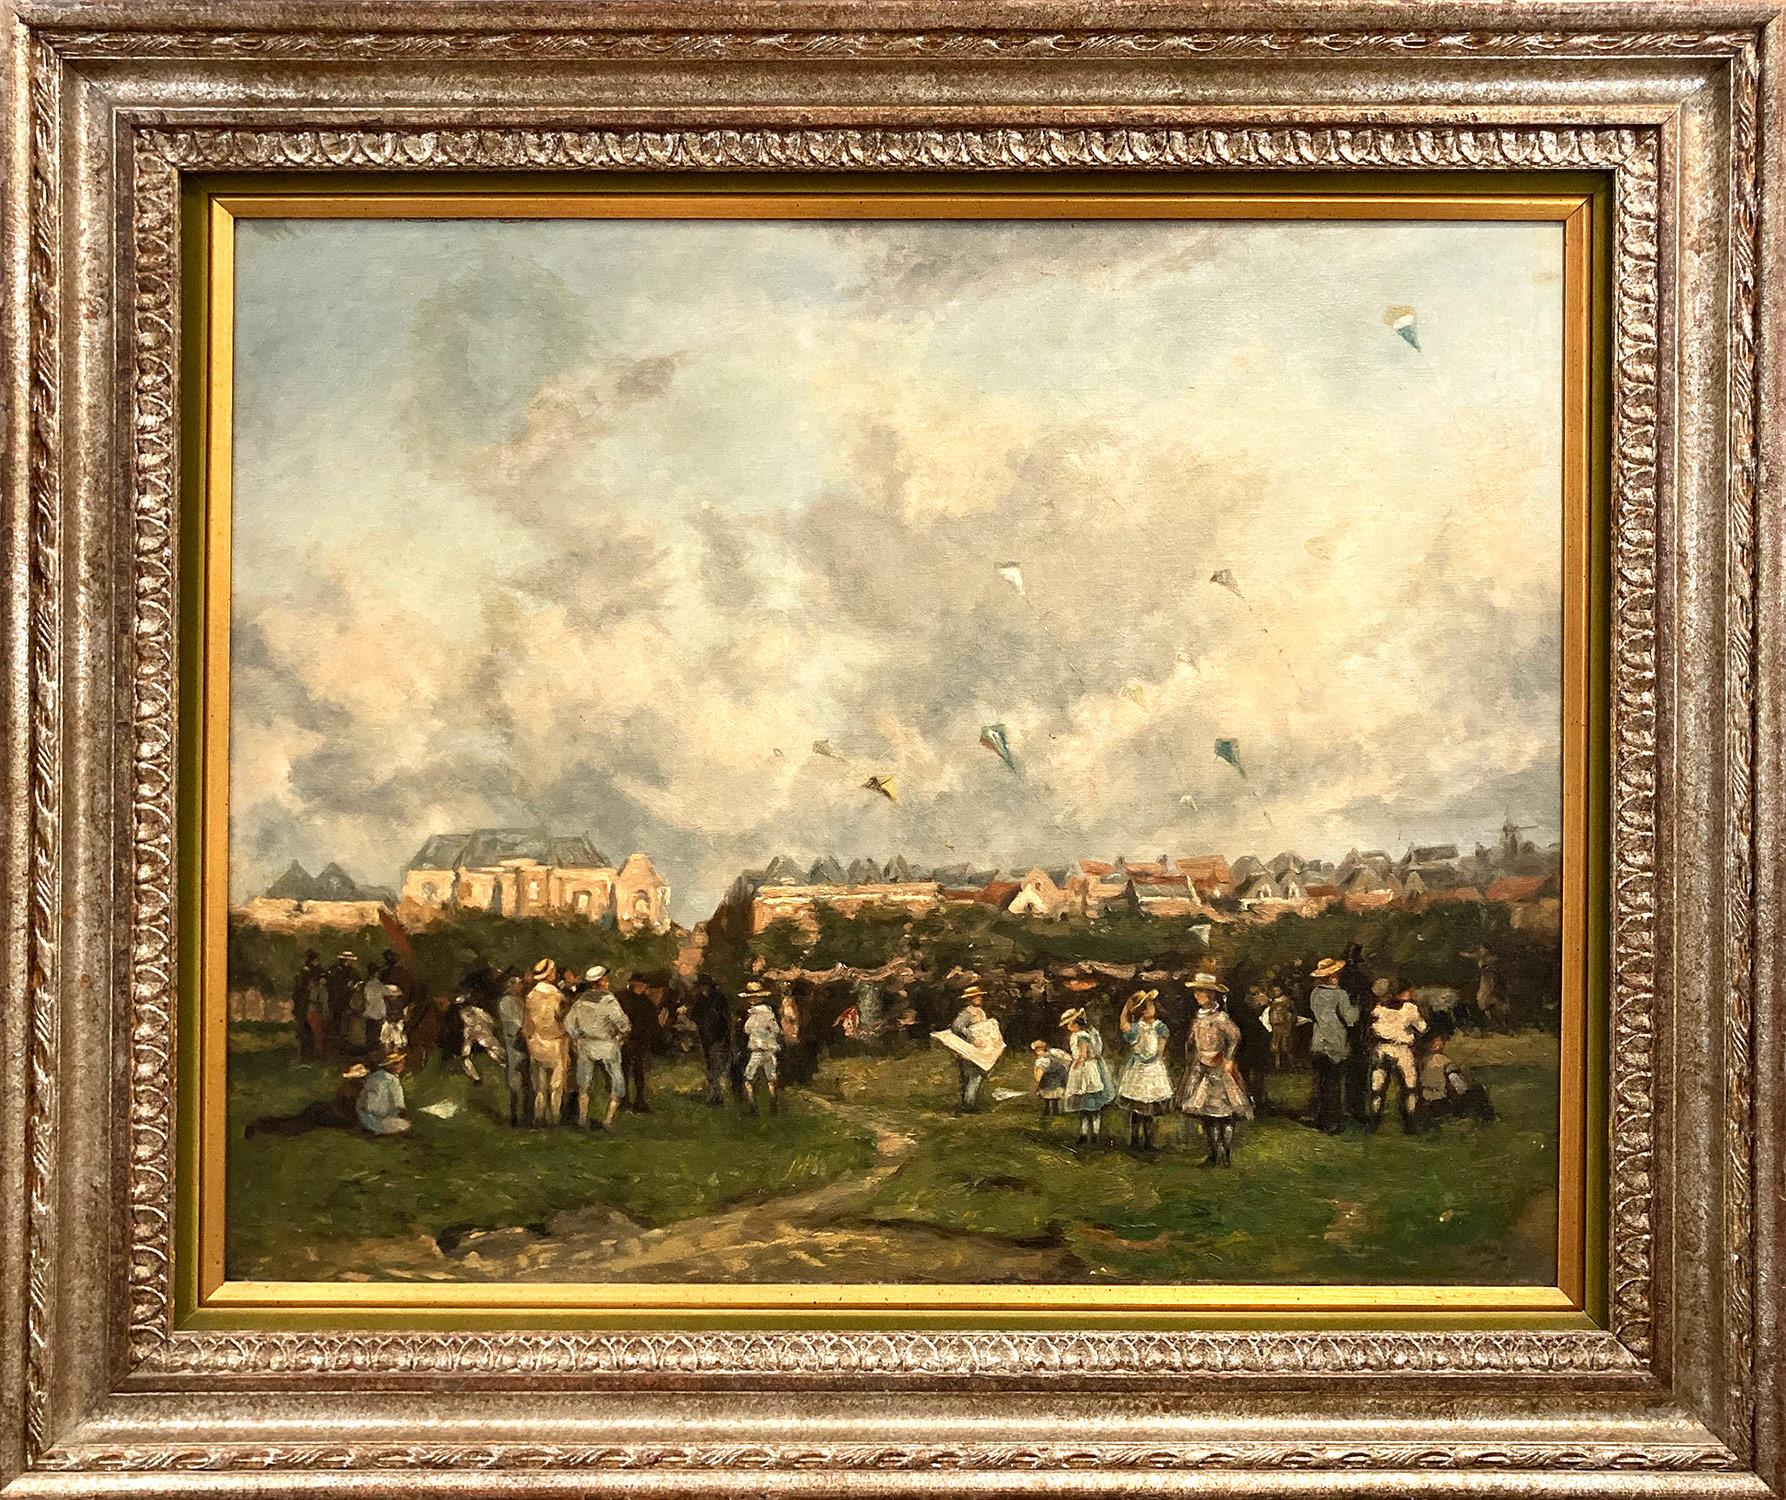 Unknown Figurative Painting - "Day Flying Kites" British Country Side Impressionist Oil Painting with Figures 